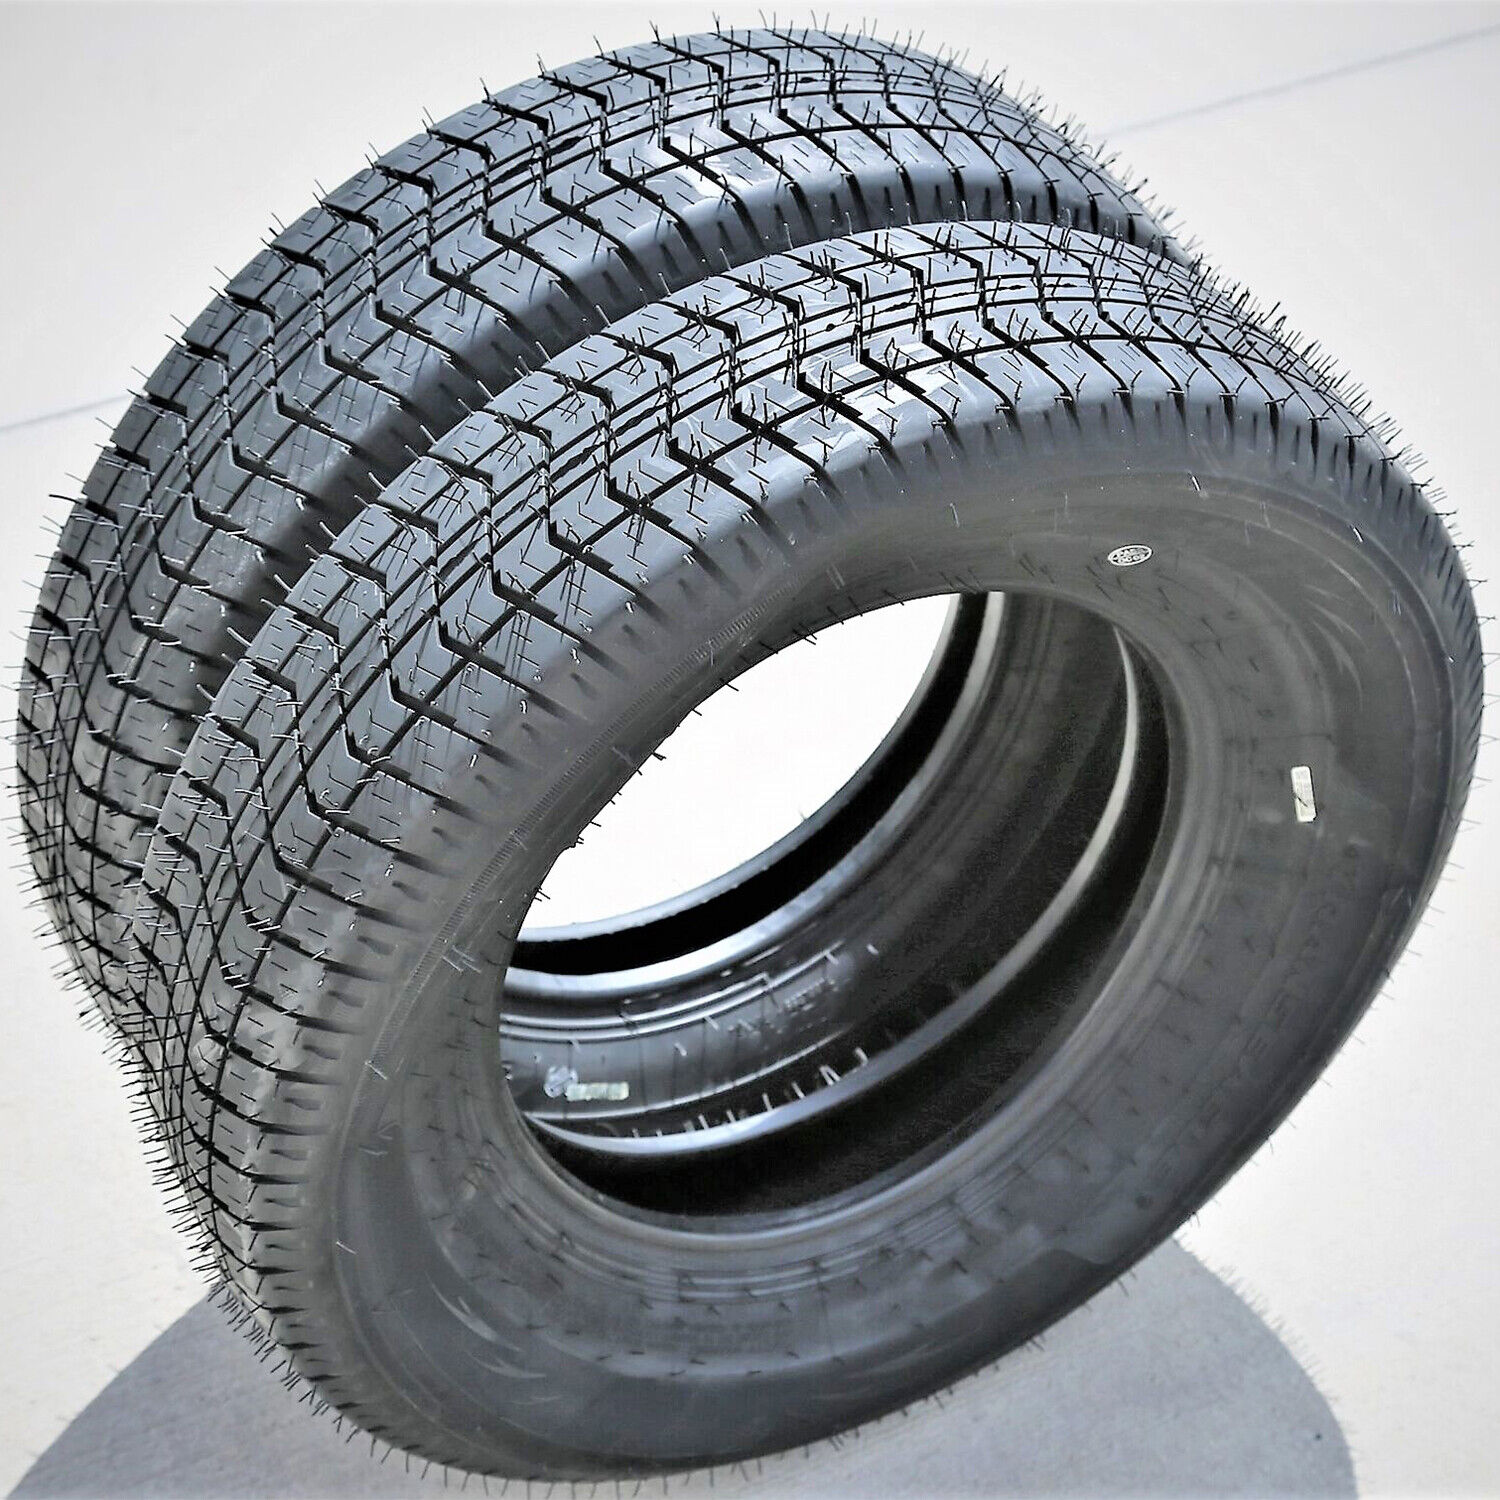 2 Tires Transeagle TE118 ST 175/80D13 175-80-13 175/80/13 Load C 6 Ply Trailer